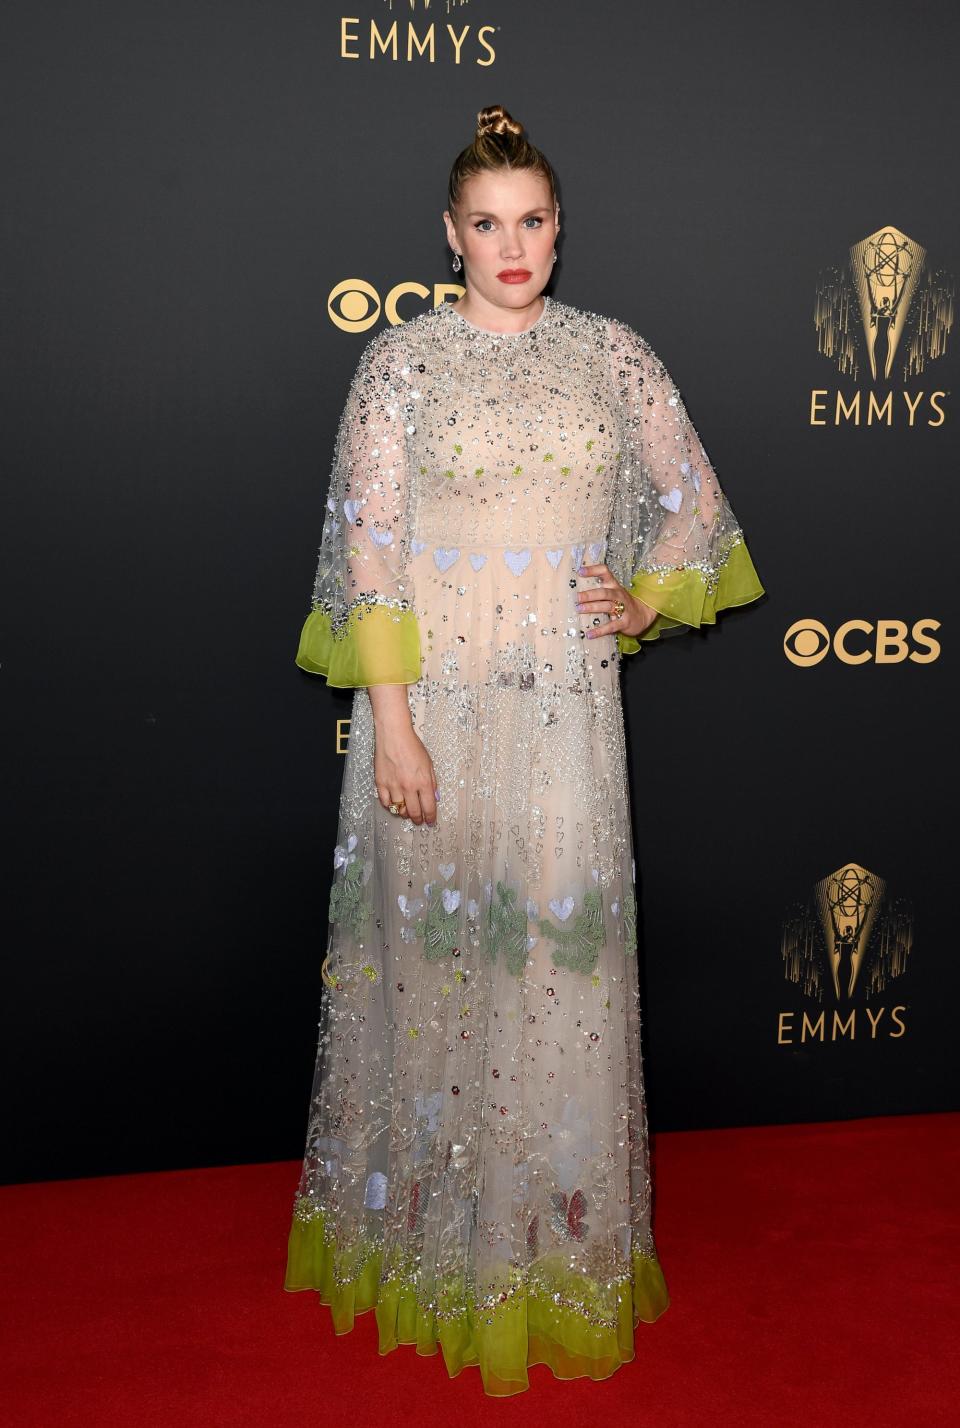 Emerald Fennell wears a sparkly, cream dress on the Emmys red carpet.